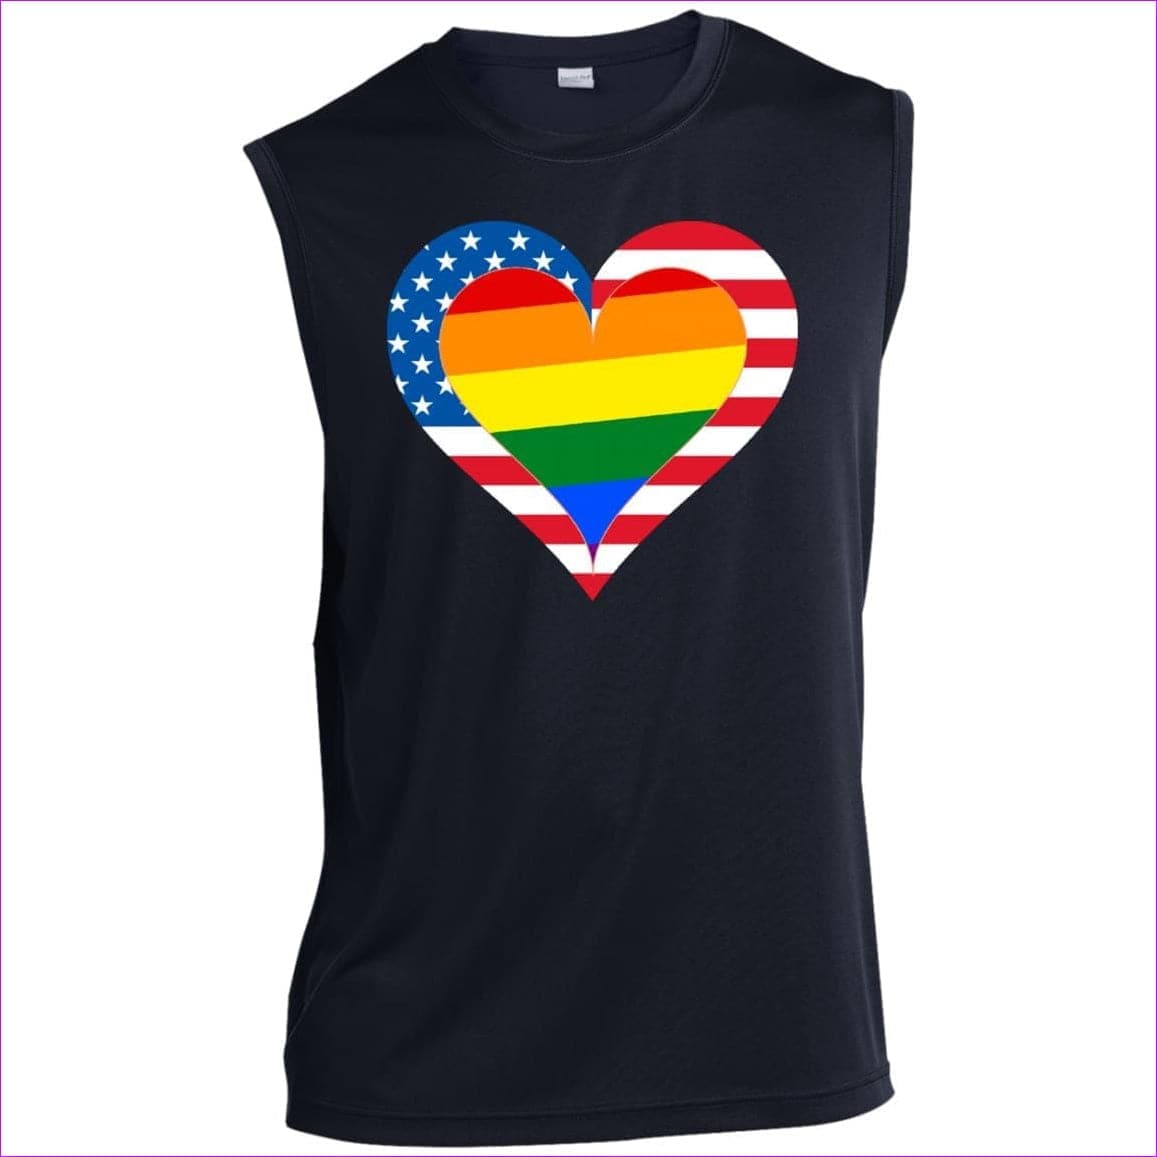 True Navy - Country & Pride Love Men’s Sleeveless Performance Tee - mens tank top at TFC&H Co.